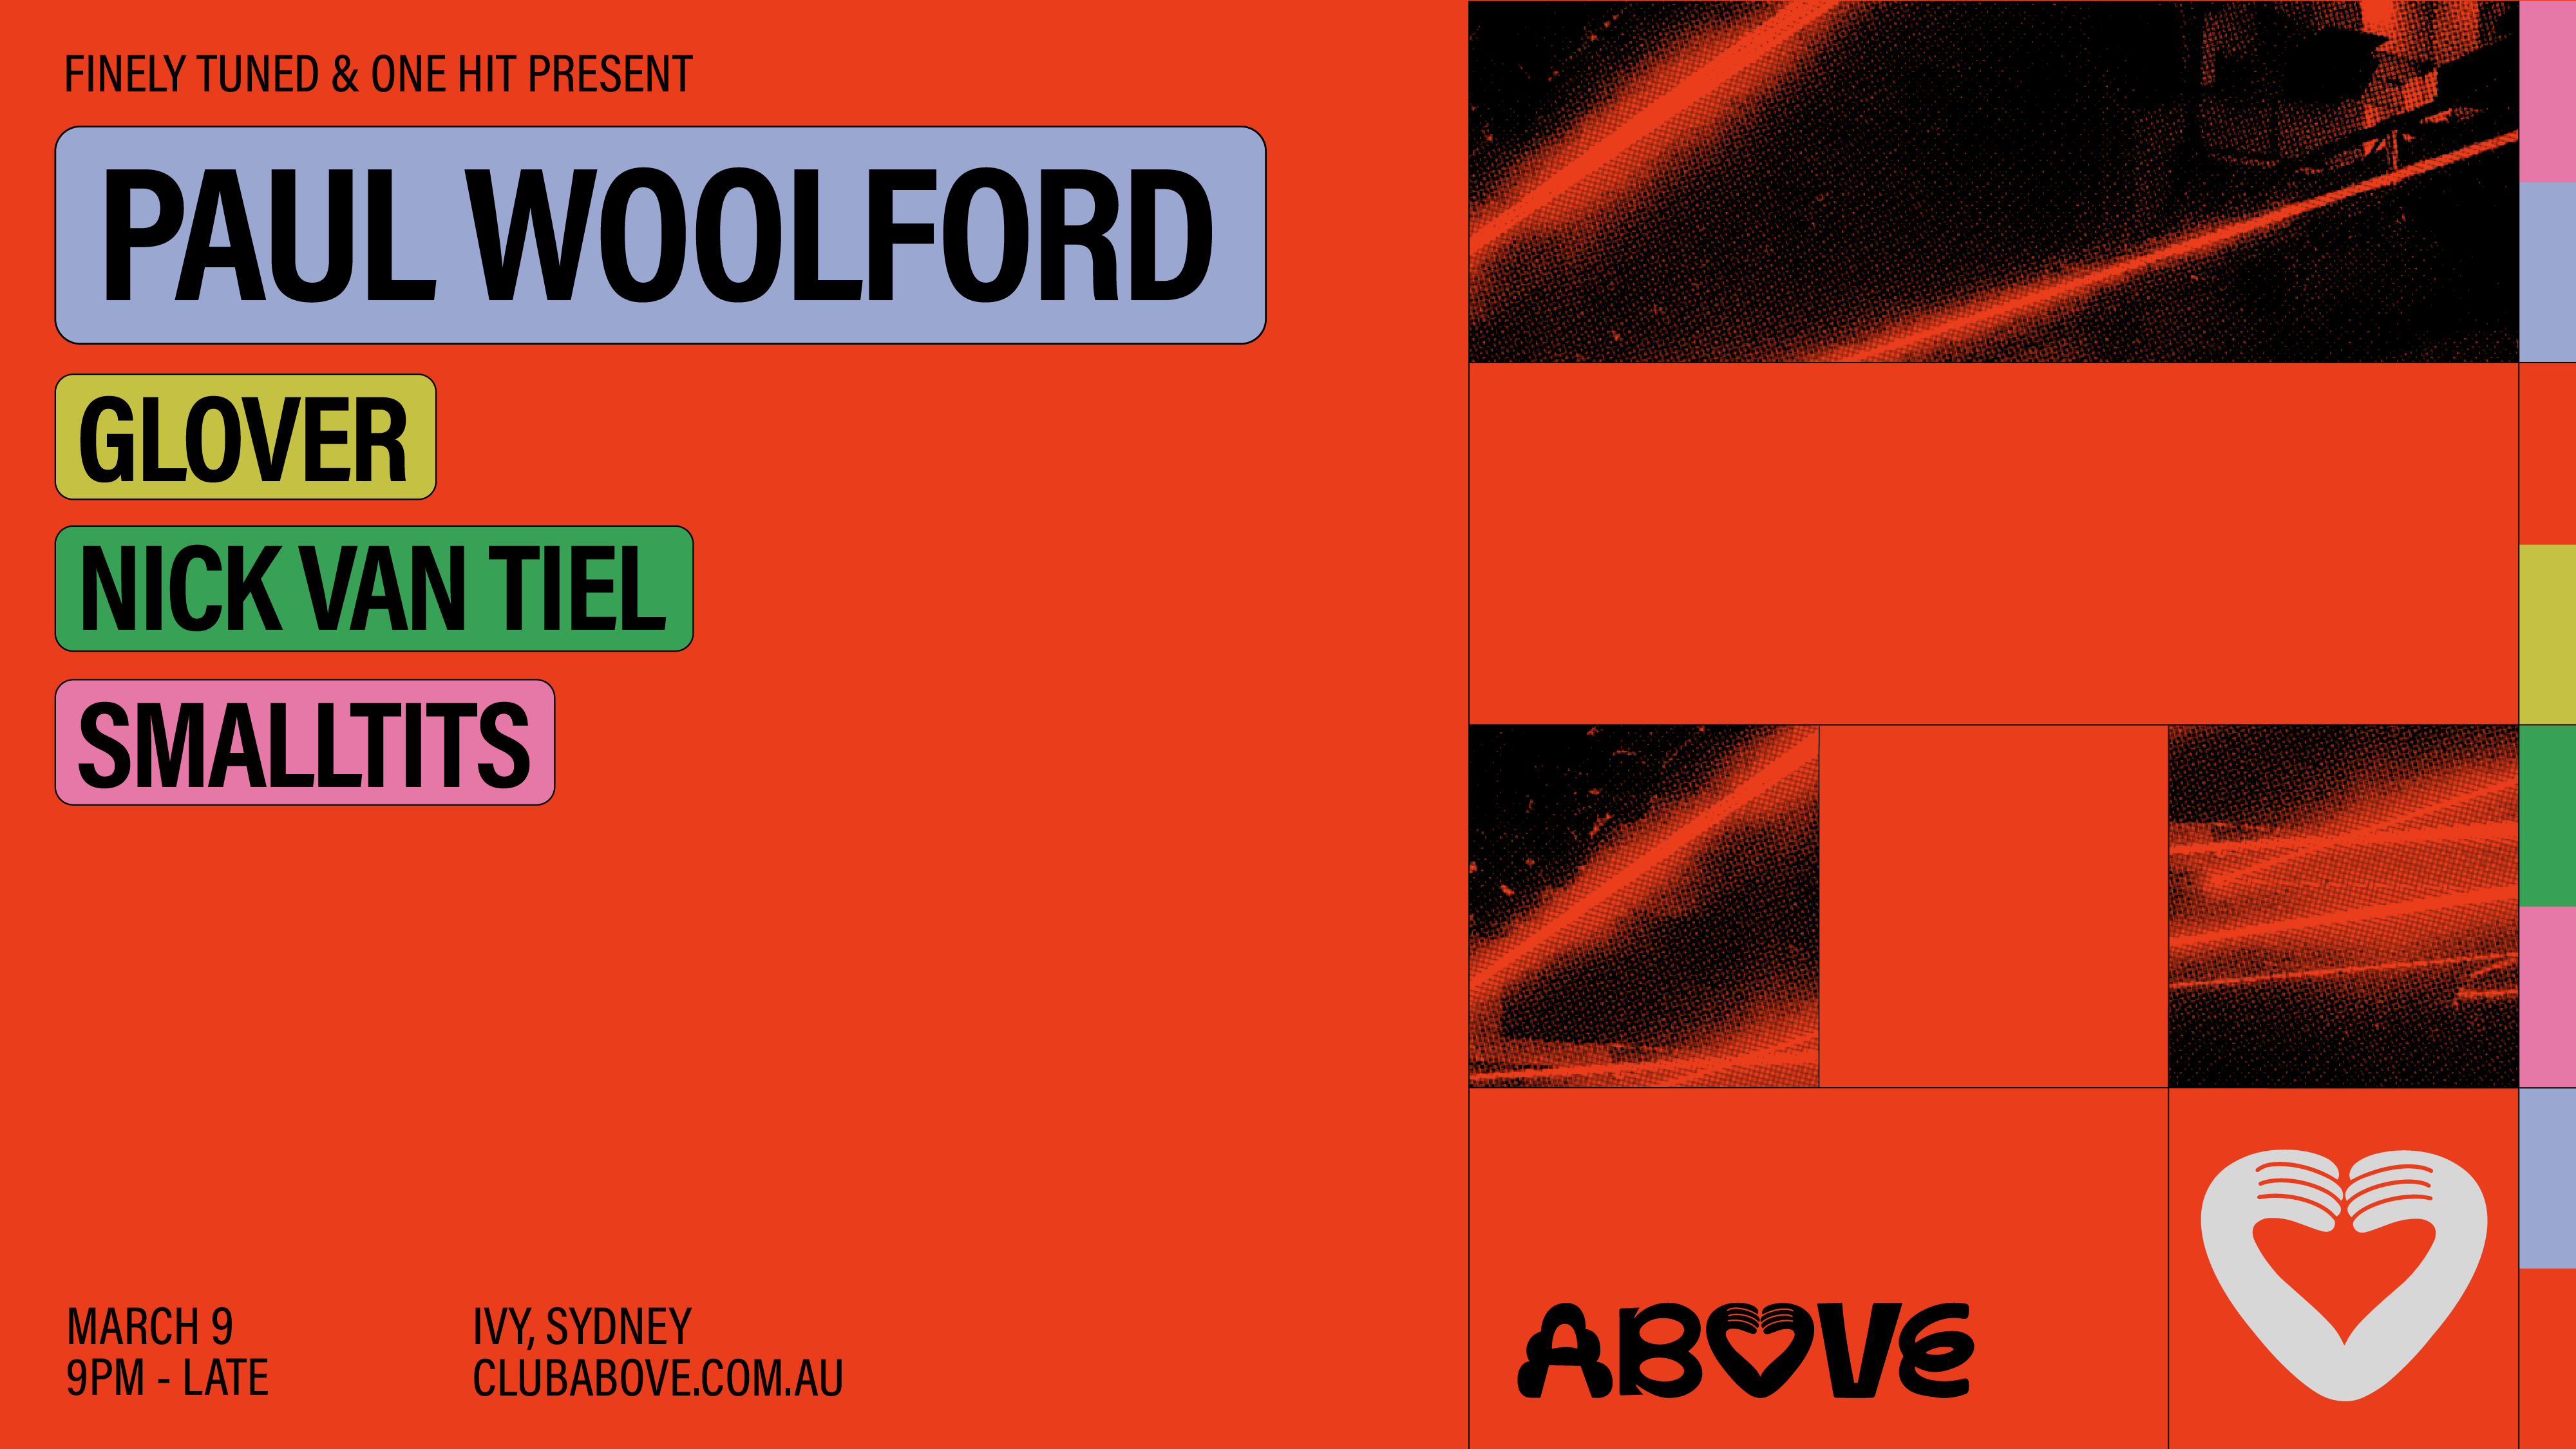 Above — March 9 feat. Paul Woolford (UK) - Página frontal